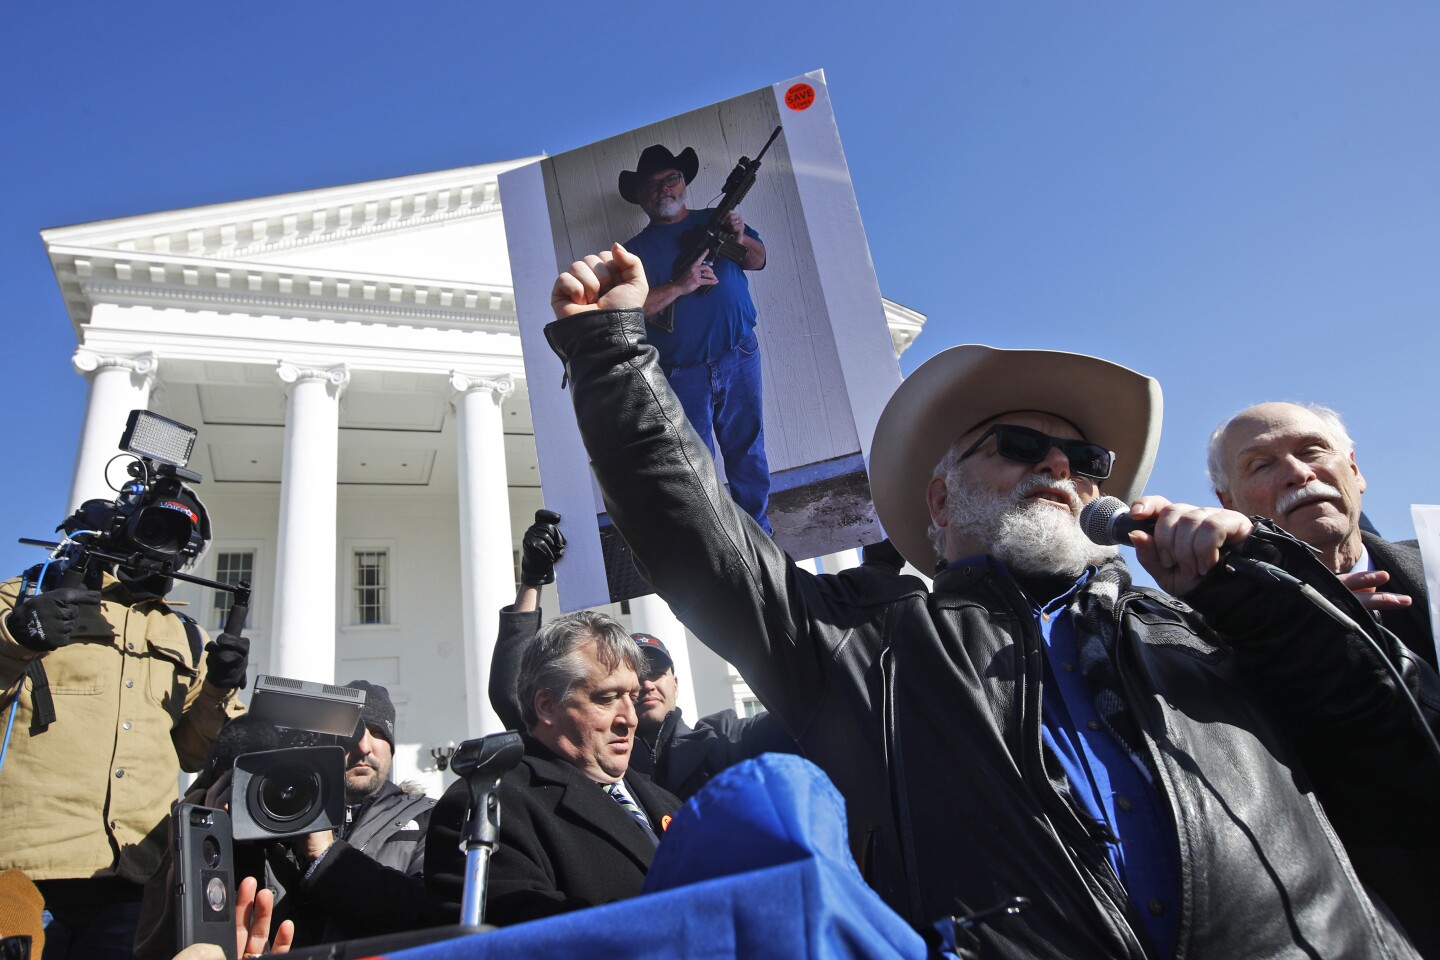 Thousands rally in Virginia’s capital for gun rights; police brace for trouble - Los ...